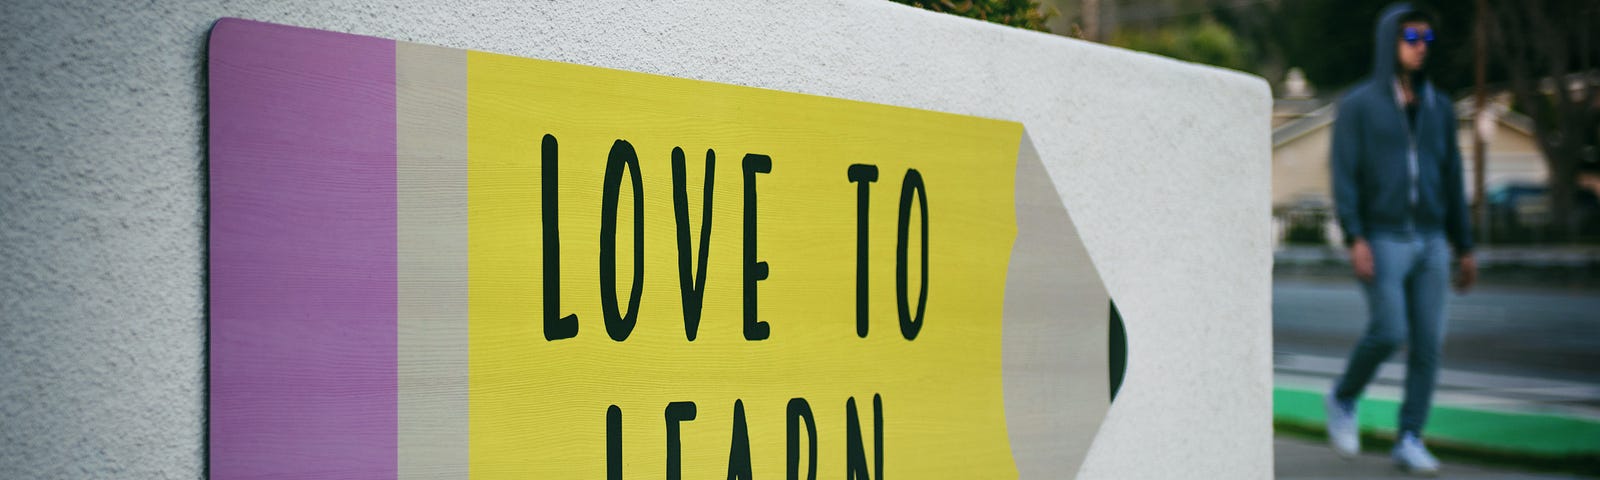 LOVE TO LEARN SIGN. Reirrating the importance to always learn